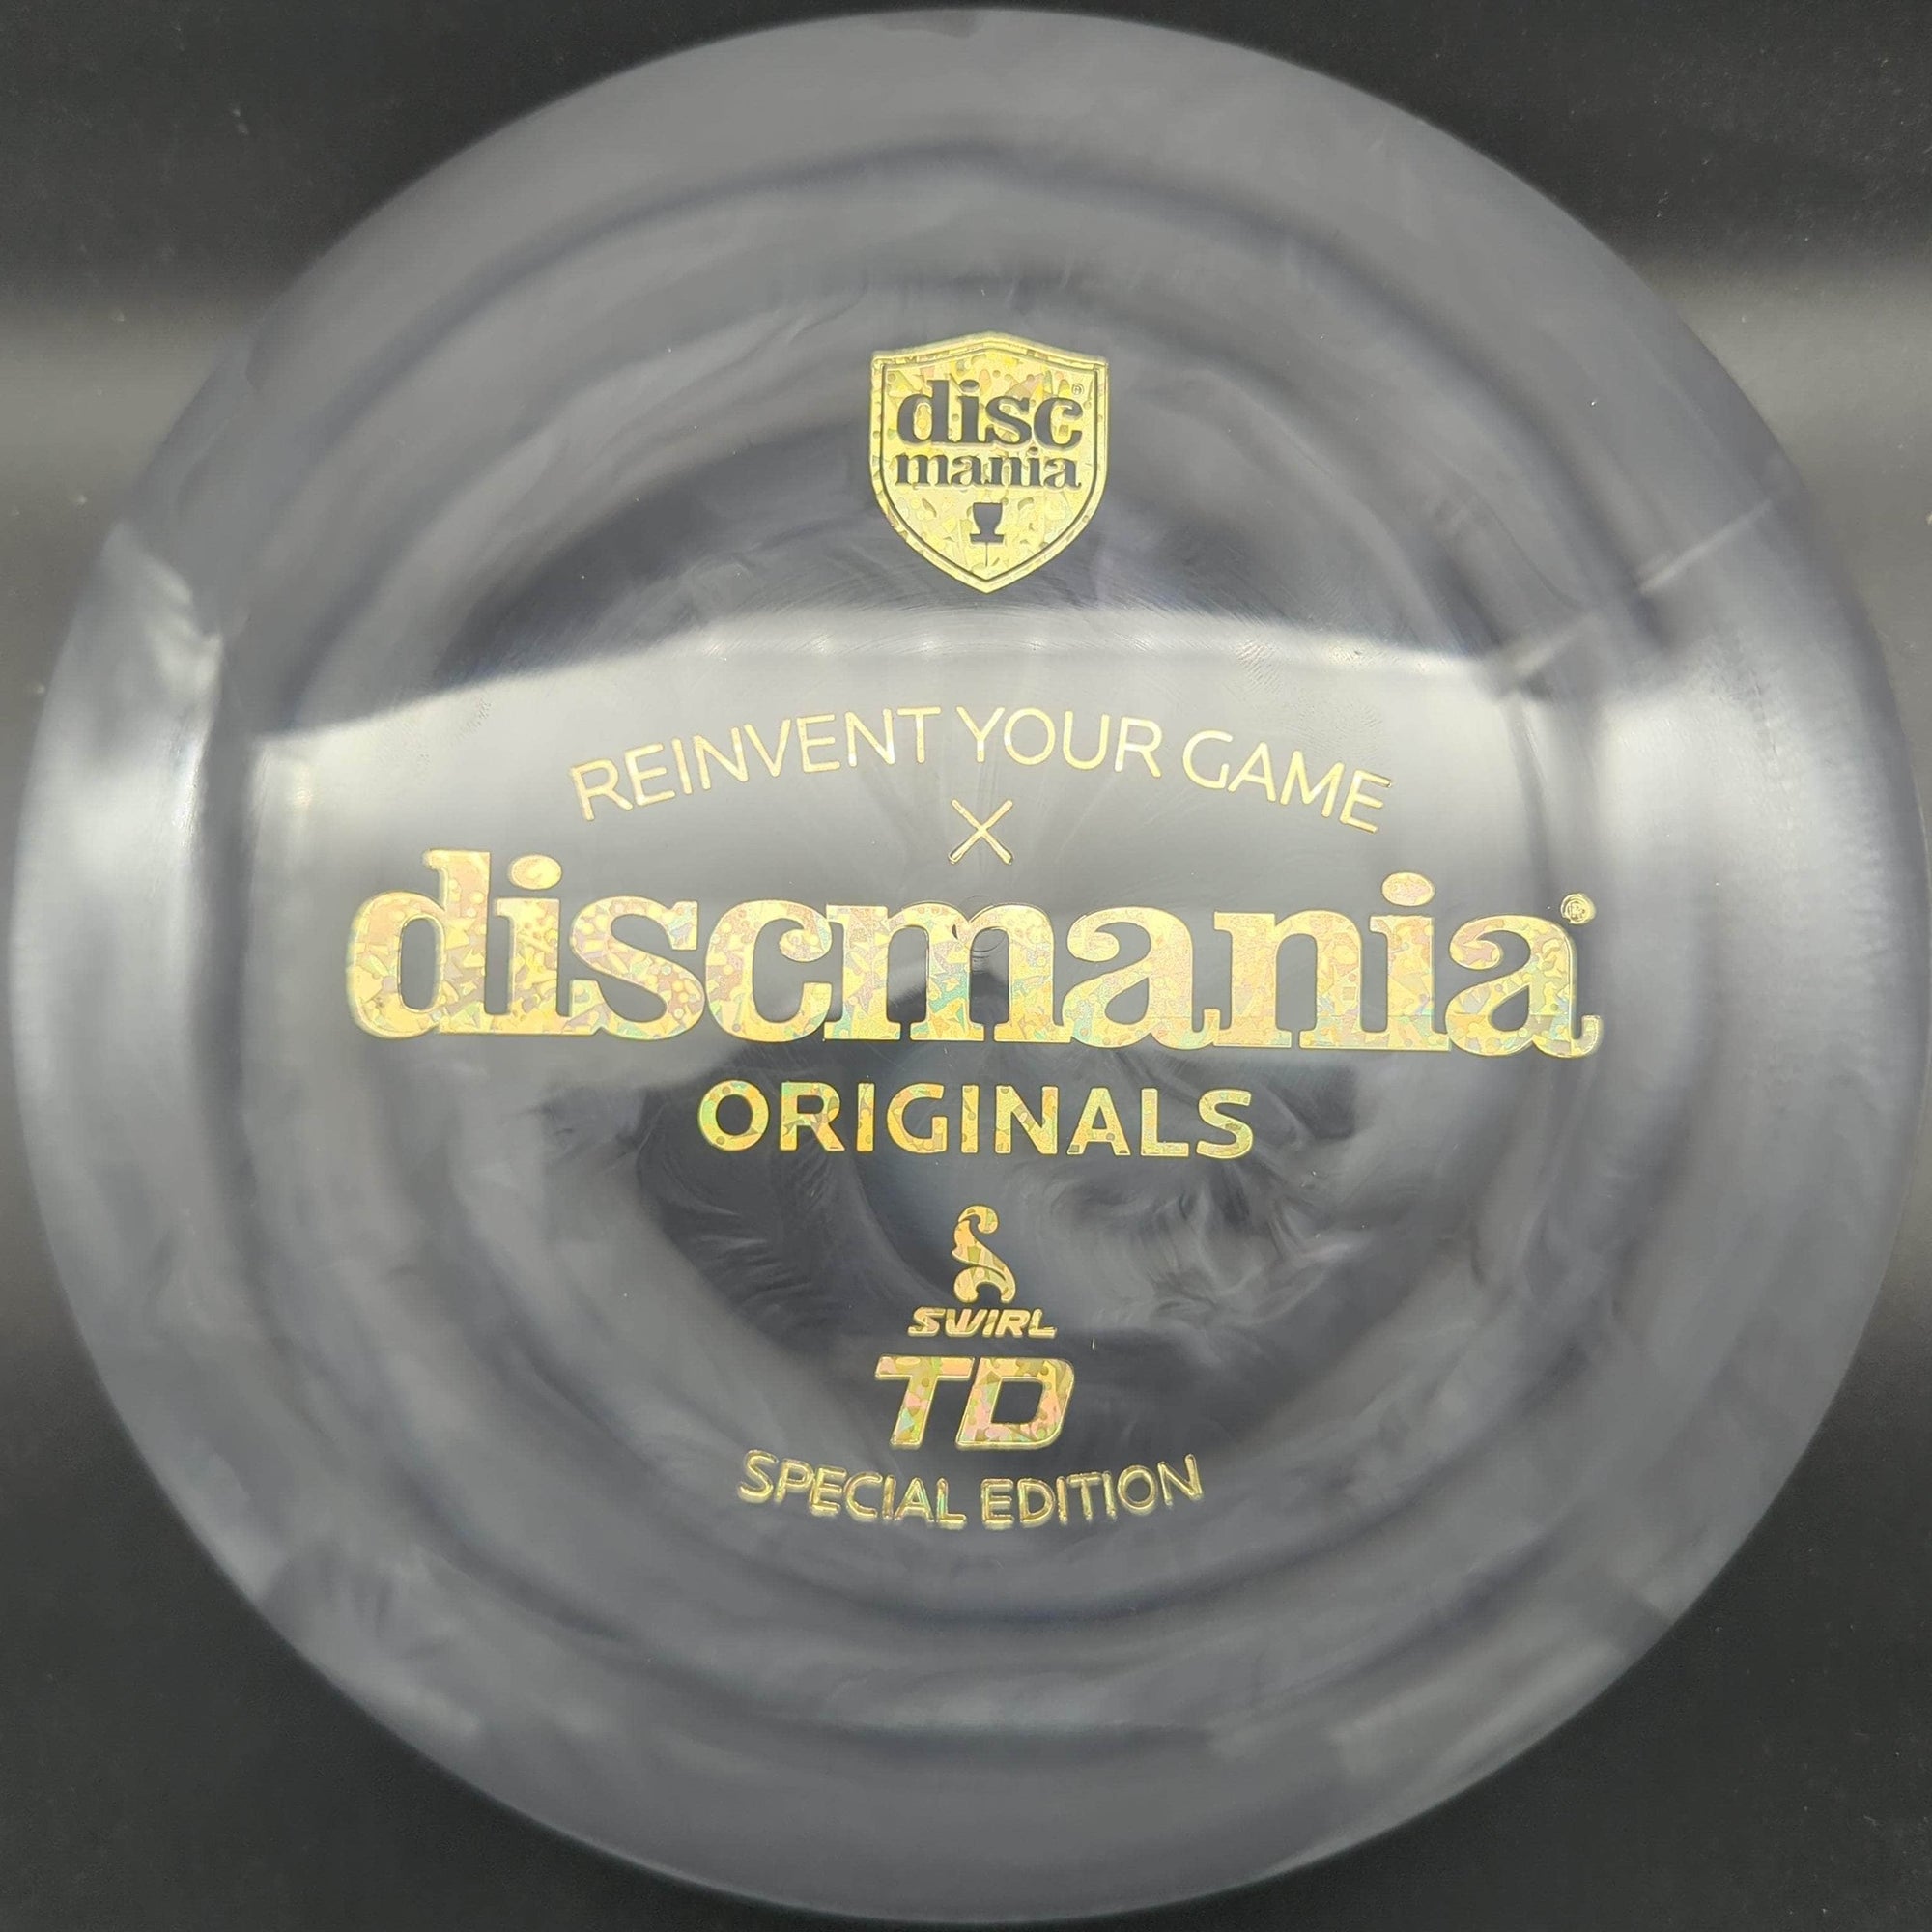 Discmania Fairway Driver Black Gold Stamp 173g TD, Swirly S-Line, Special Edition